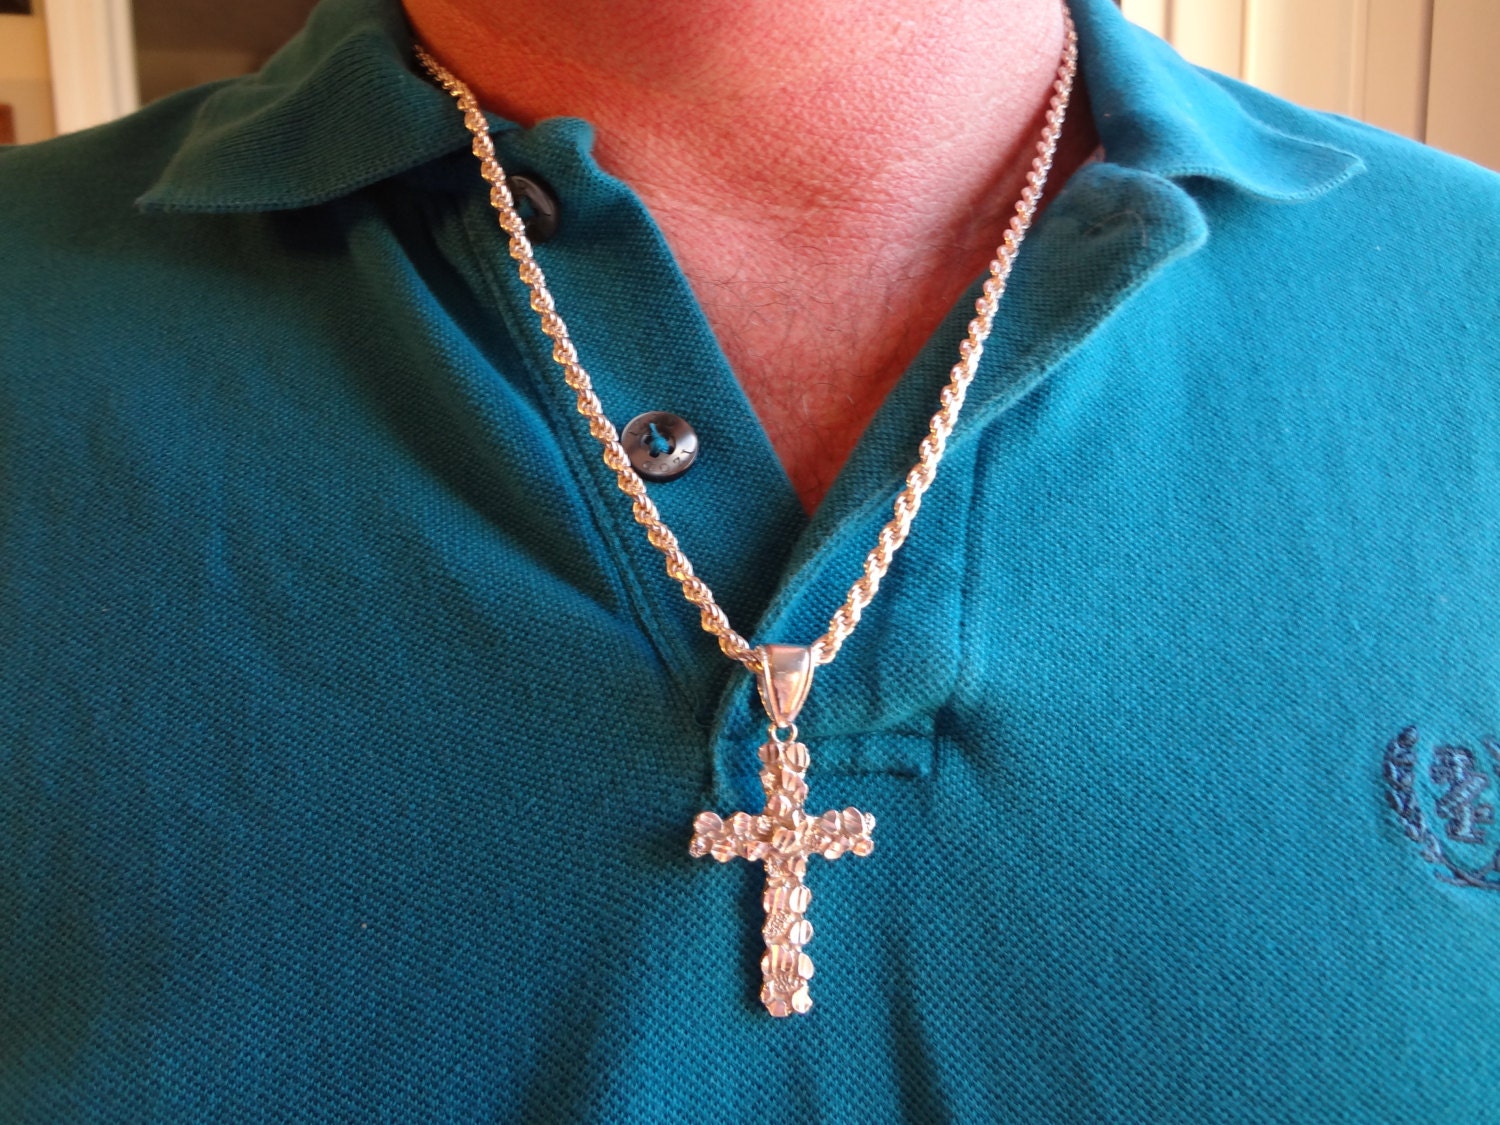 Mens Silver Cross Necklace 24 inch Rope Chain 925 Sterling